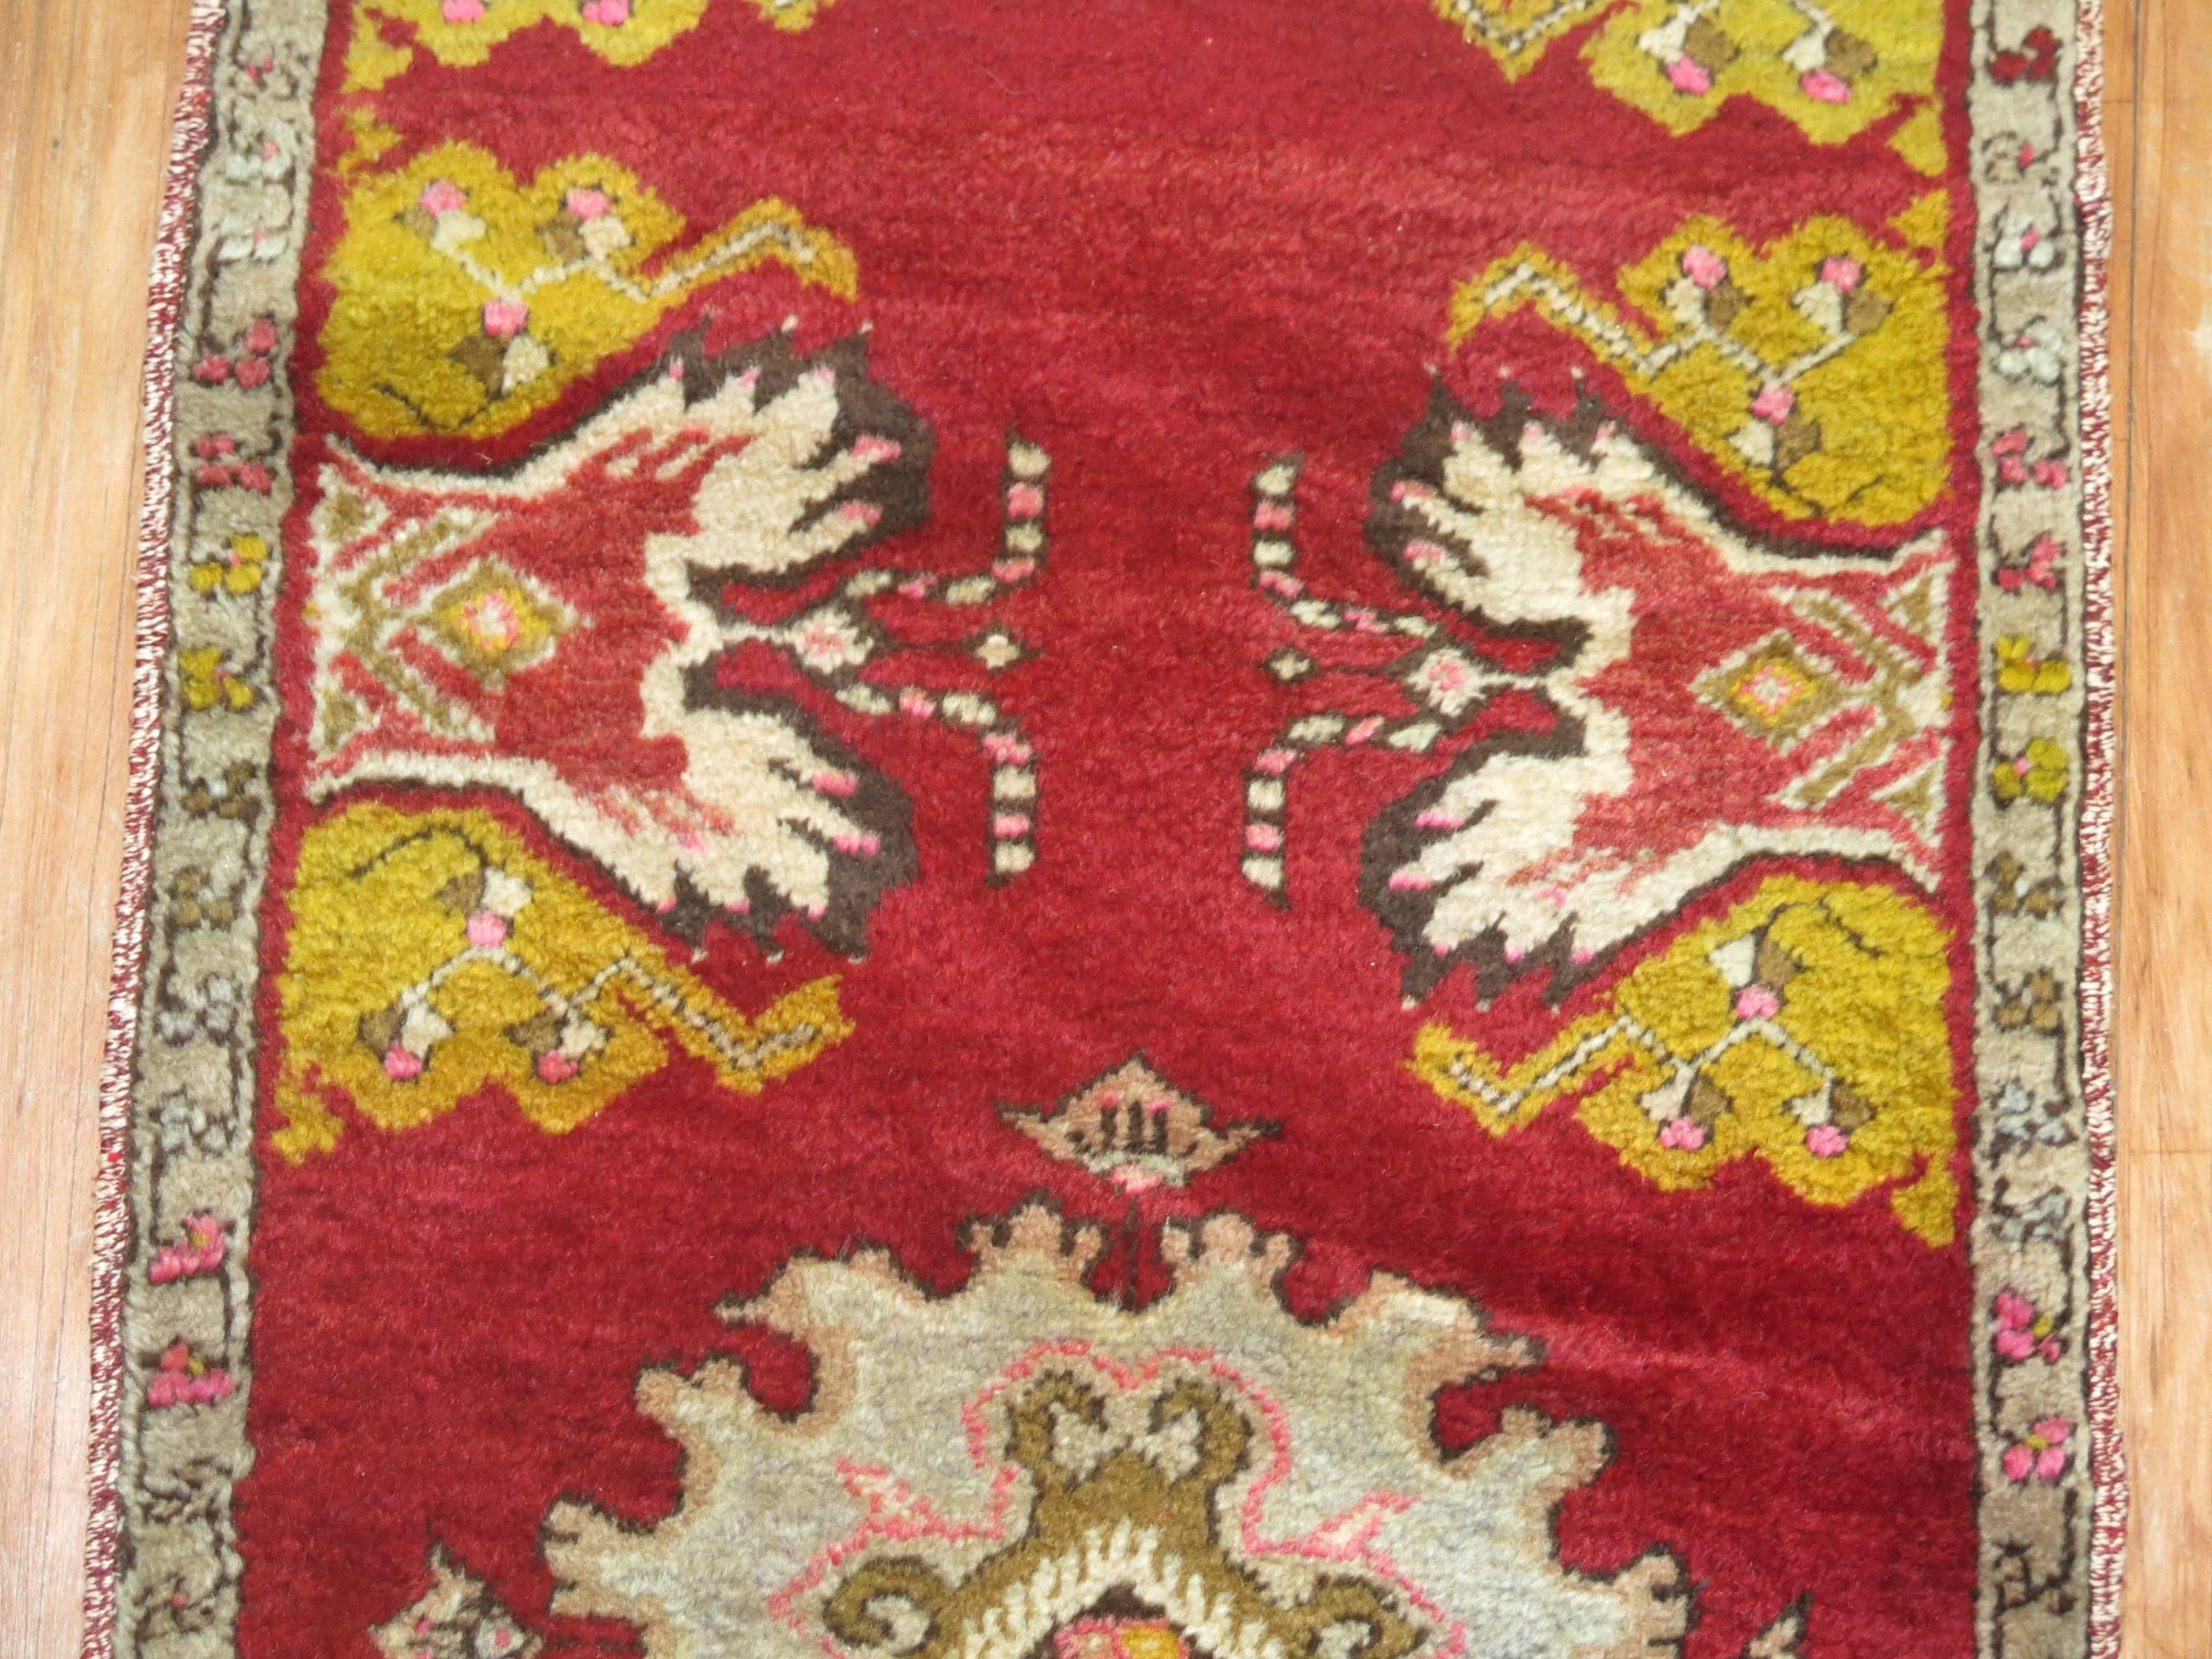 A narrow vintage turkish runner in predominant bright cherry red.